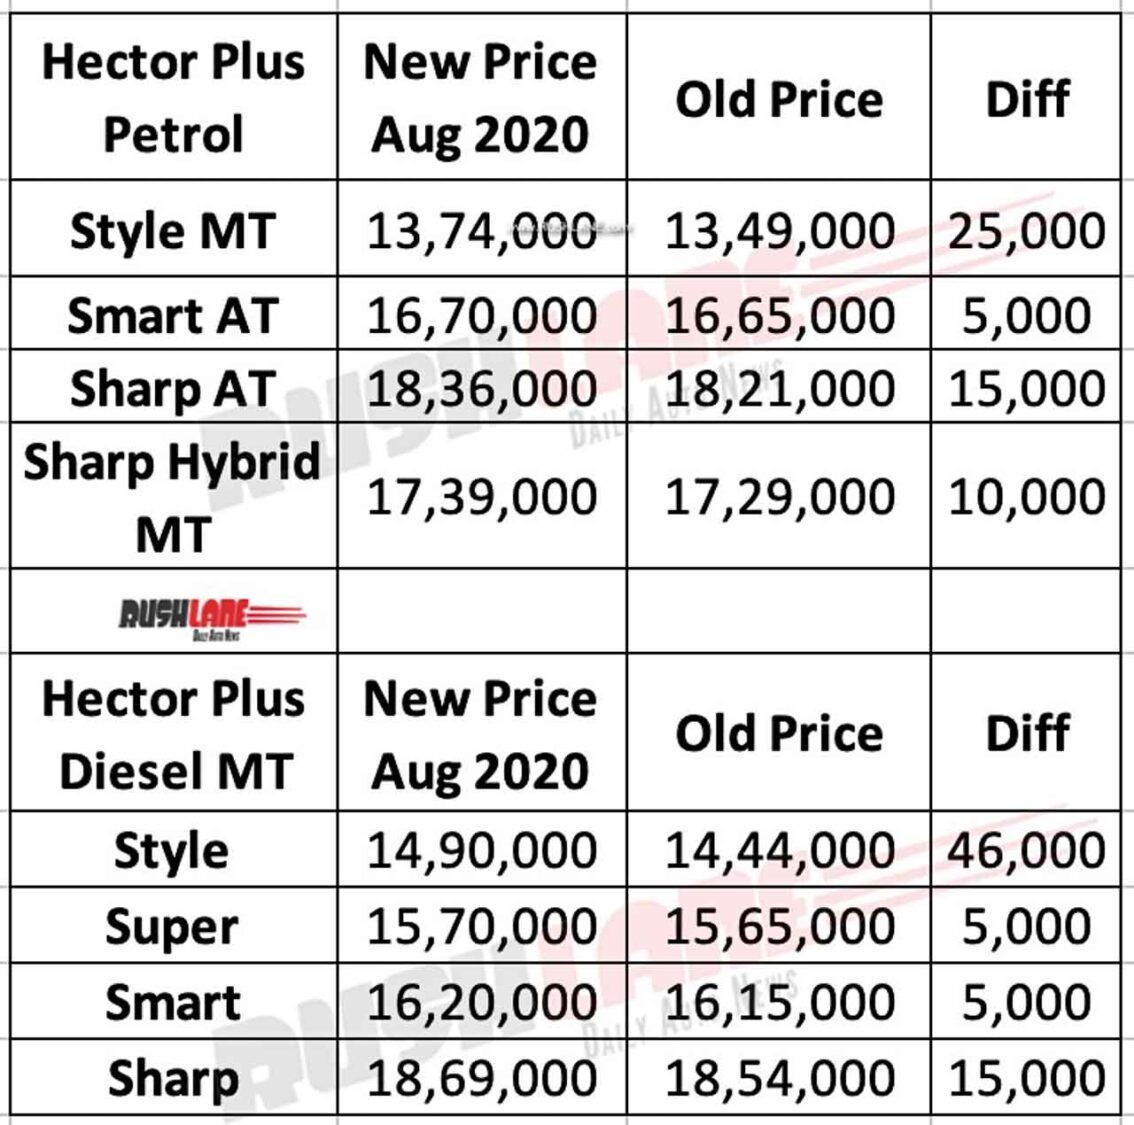 MG Hector Plus Prices New